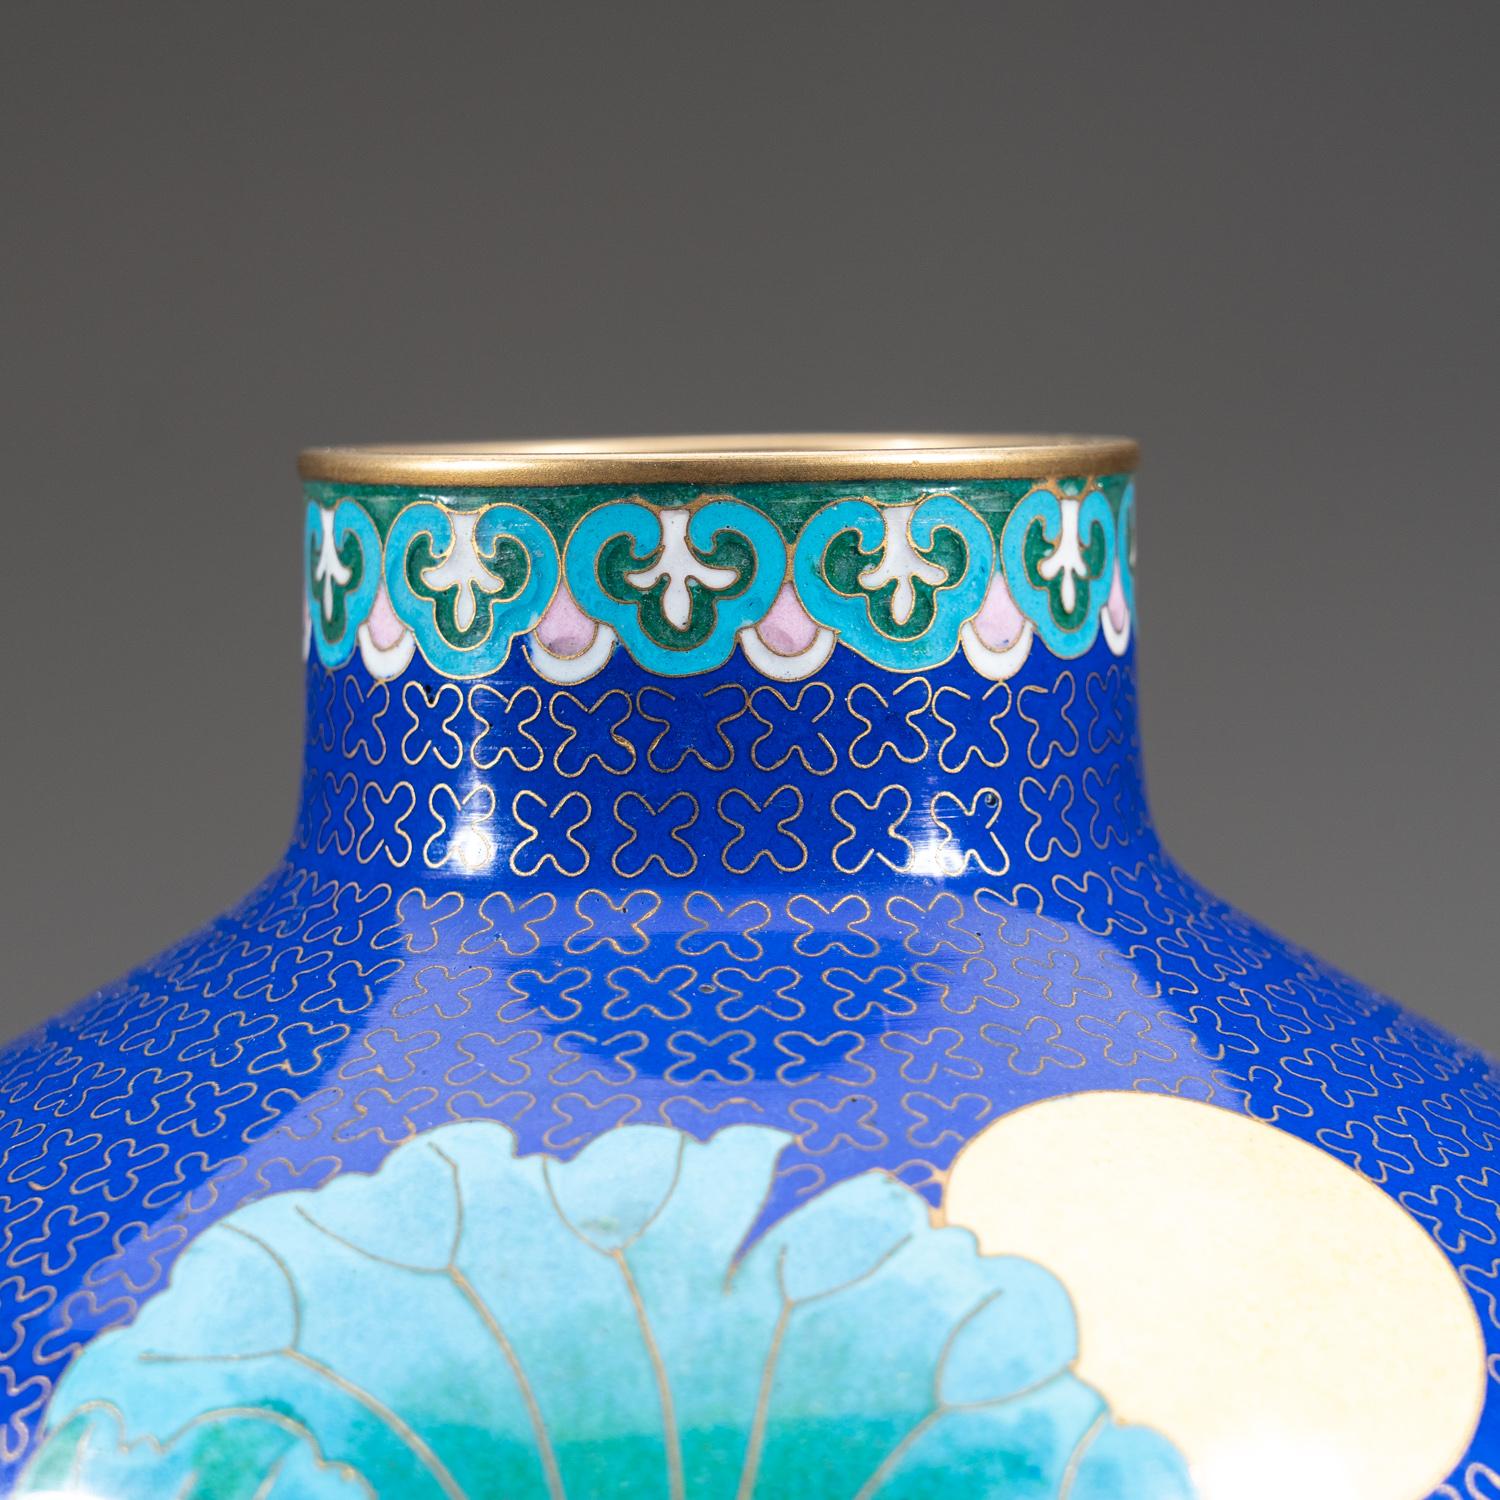 A blue cloisonné vase depicting an imperial Woman floating on a river among colorful Birds and Lillies on a celest blue background with a geometric gilt copper/bronze wire design.

Weight: 5.1 lbs, Dimension: 6.5 x 6.5 x 8 inches.

